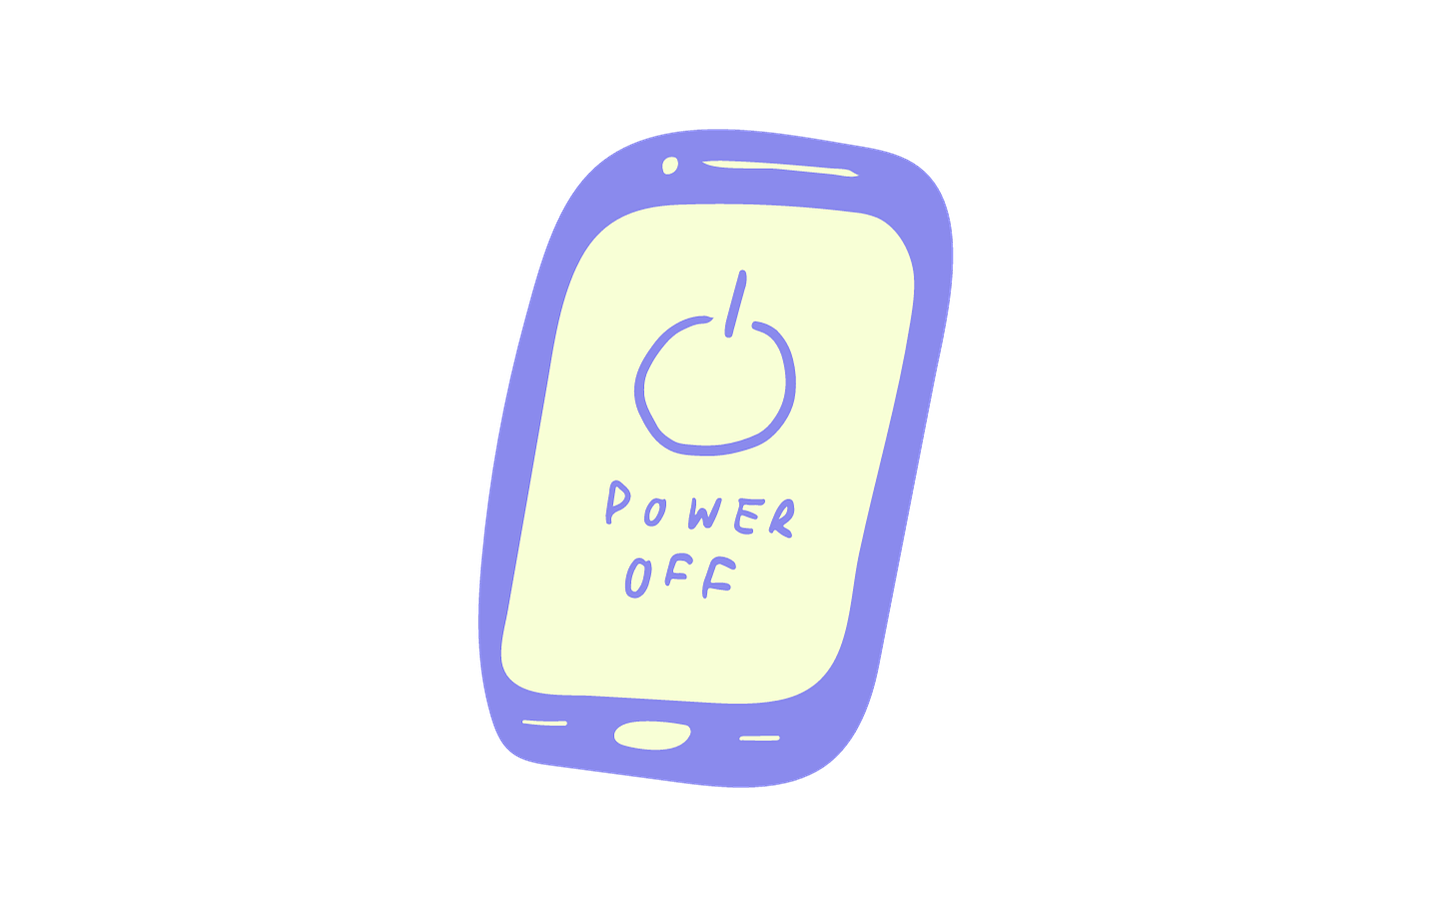 A doodle of a phone with "power off" displayed.